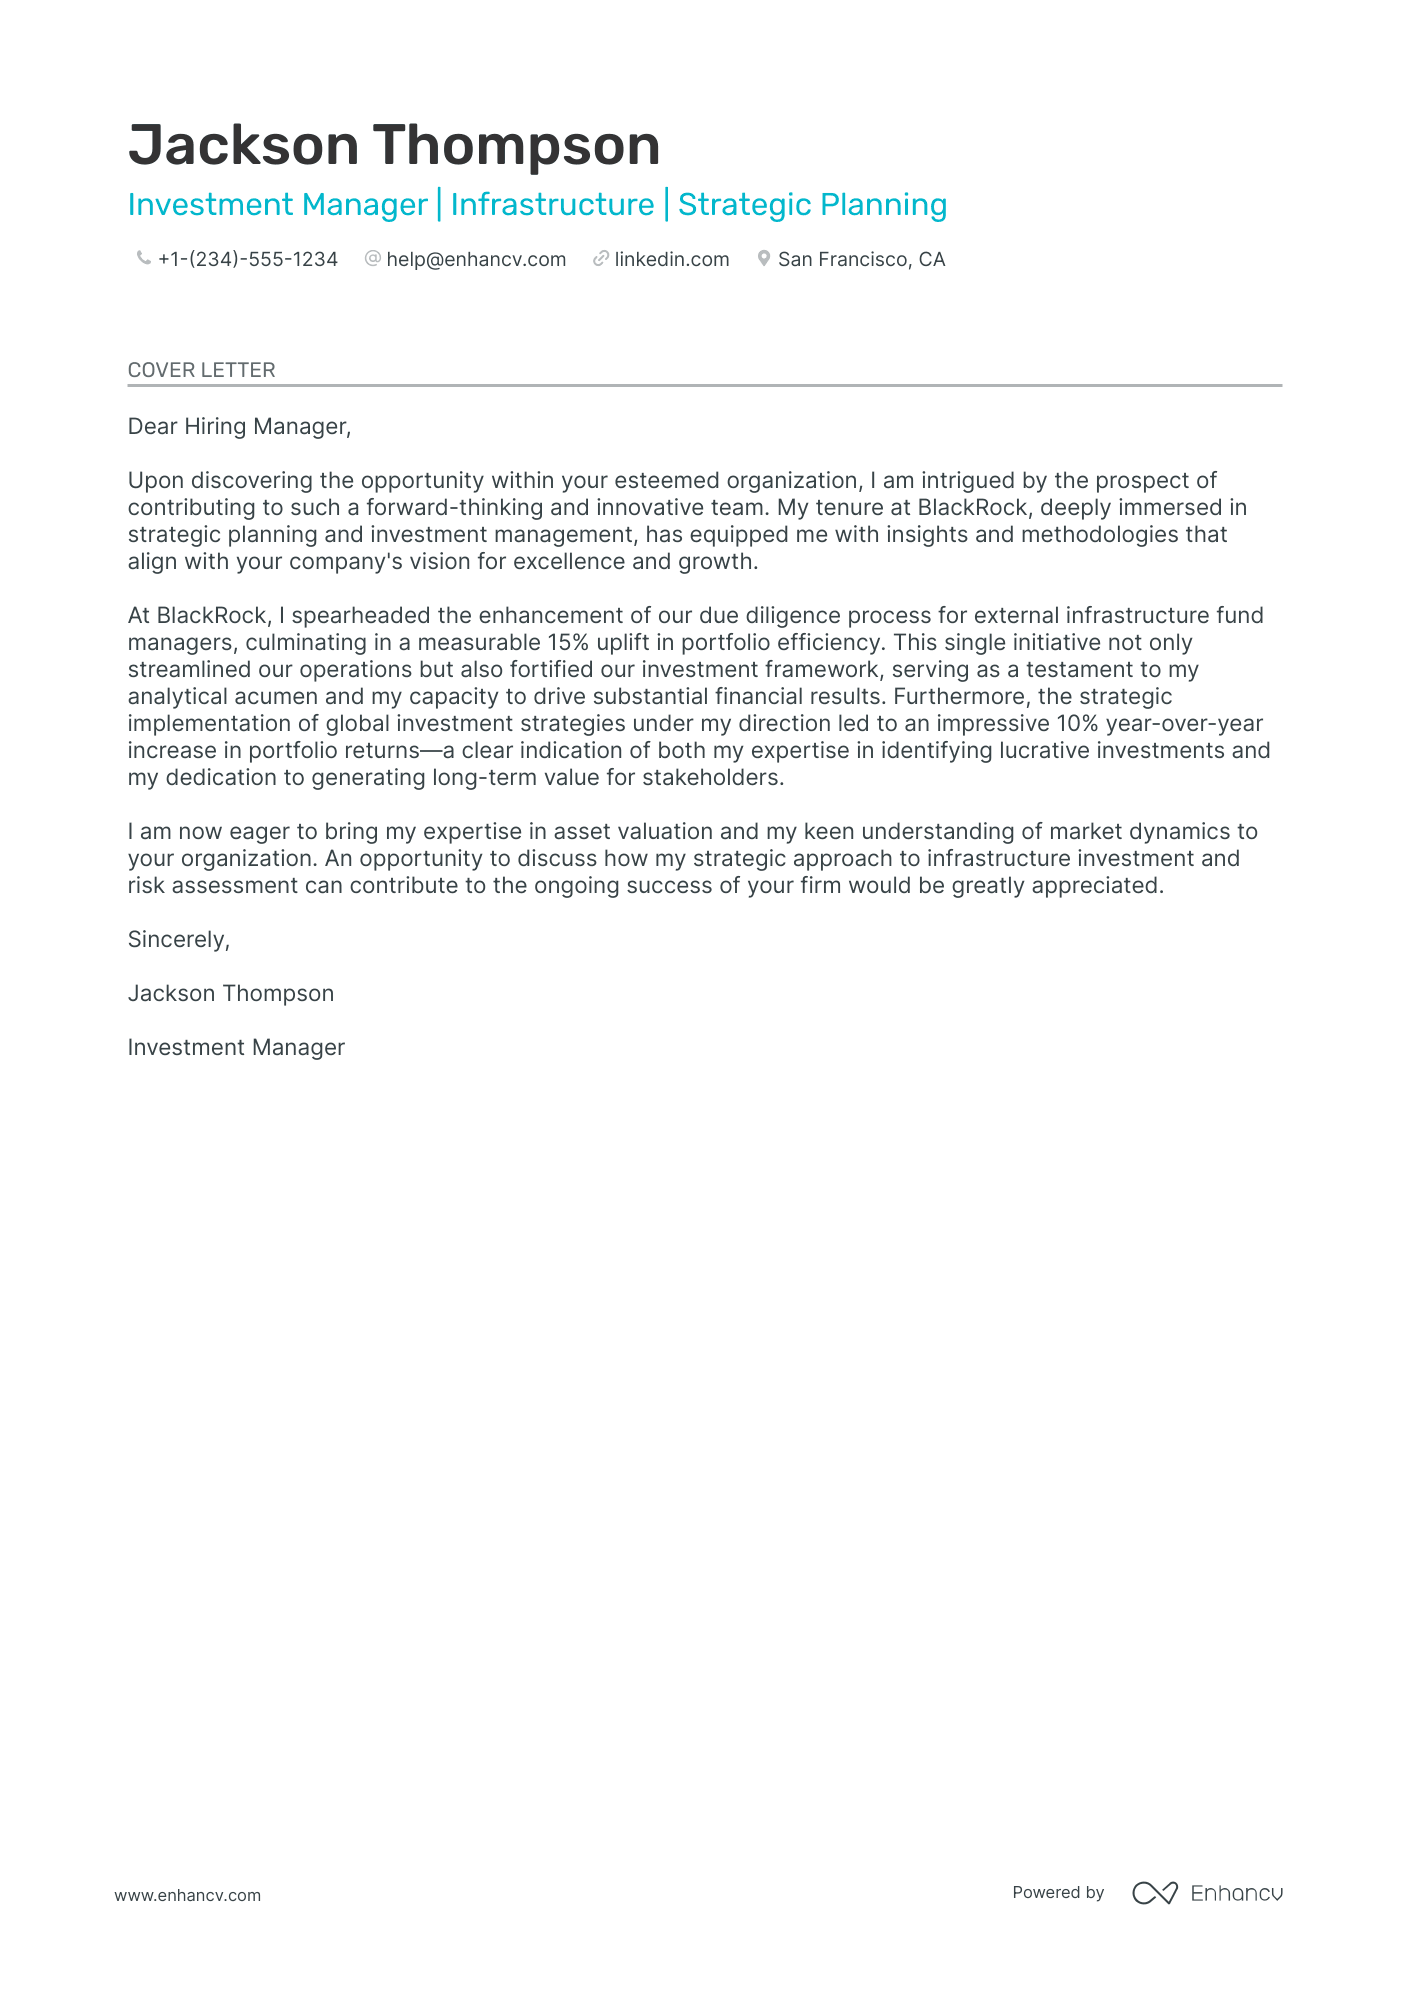 Investment Manager cover letter